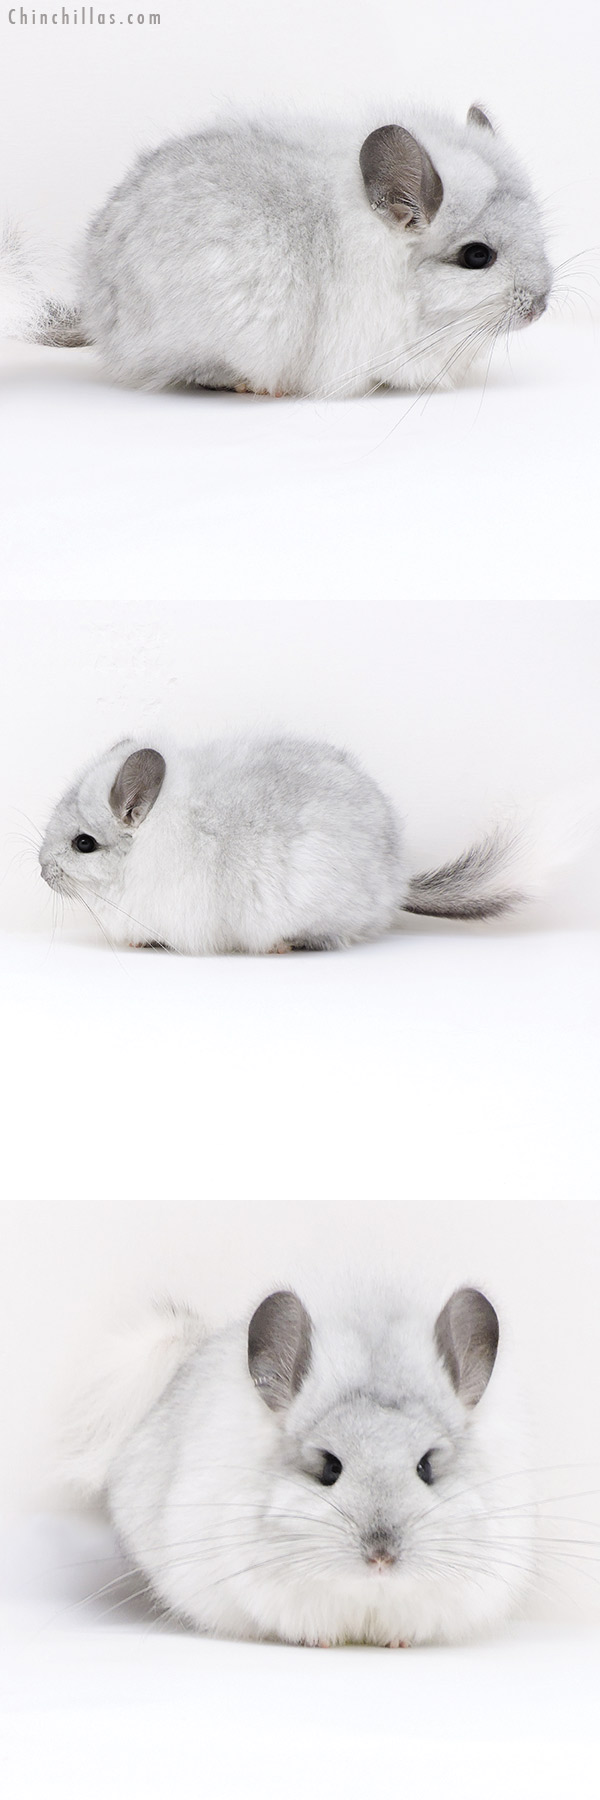 Chinchilla or related item offered for sale or export on Chinchillas.com - 18021 Exceptional White Mosaic  Royal Persian Angora Female Chinchilla